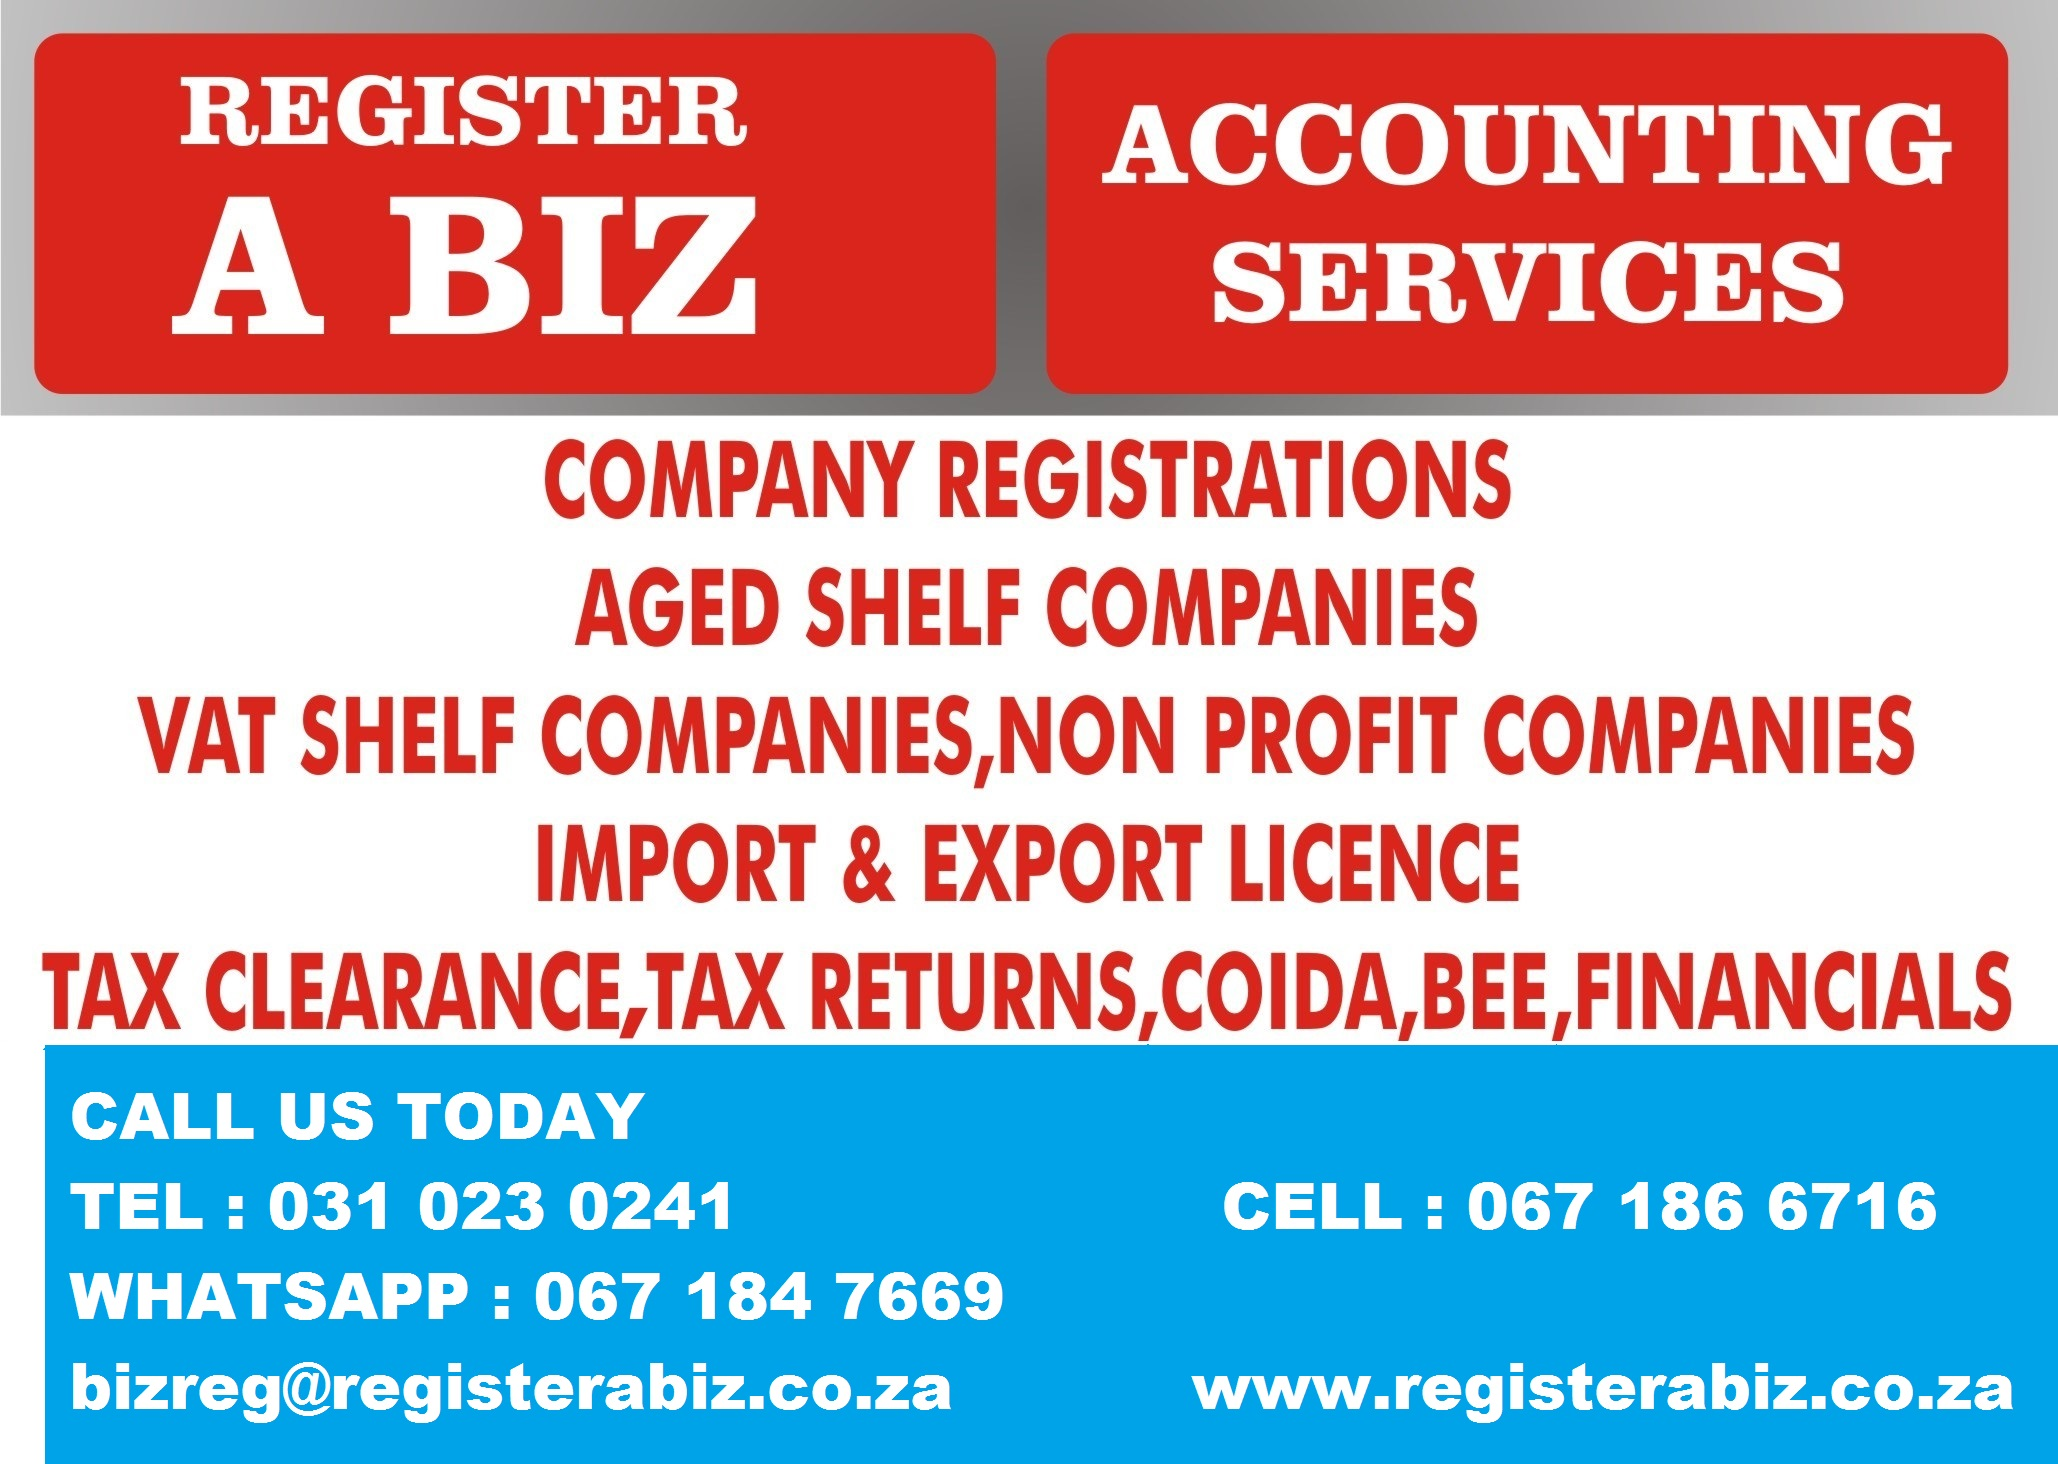 COMPANY REGISTRATIONS, ACCOUNTING AND TAX SERVICES, IMPORT / EXPORT CODE, LETTER OF GOOD STANDING, TAX CLEARANCE.